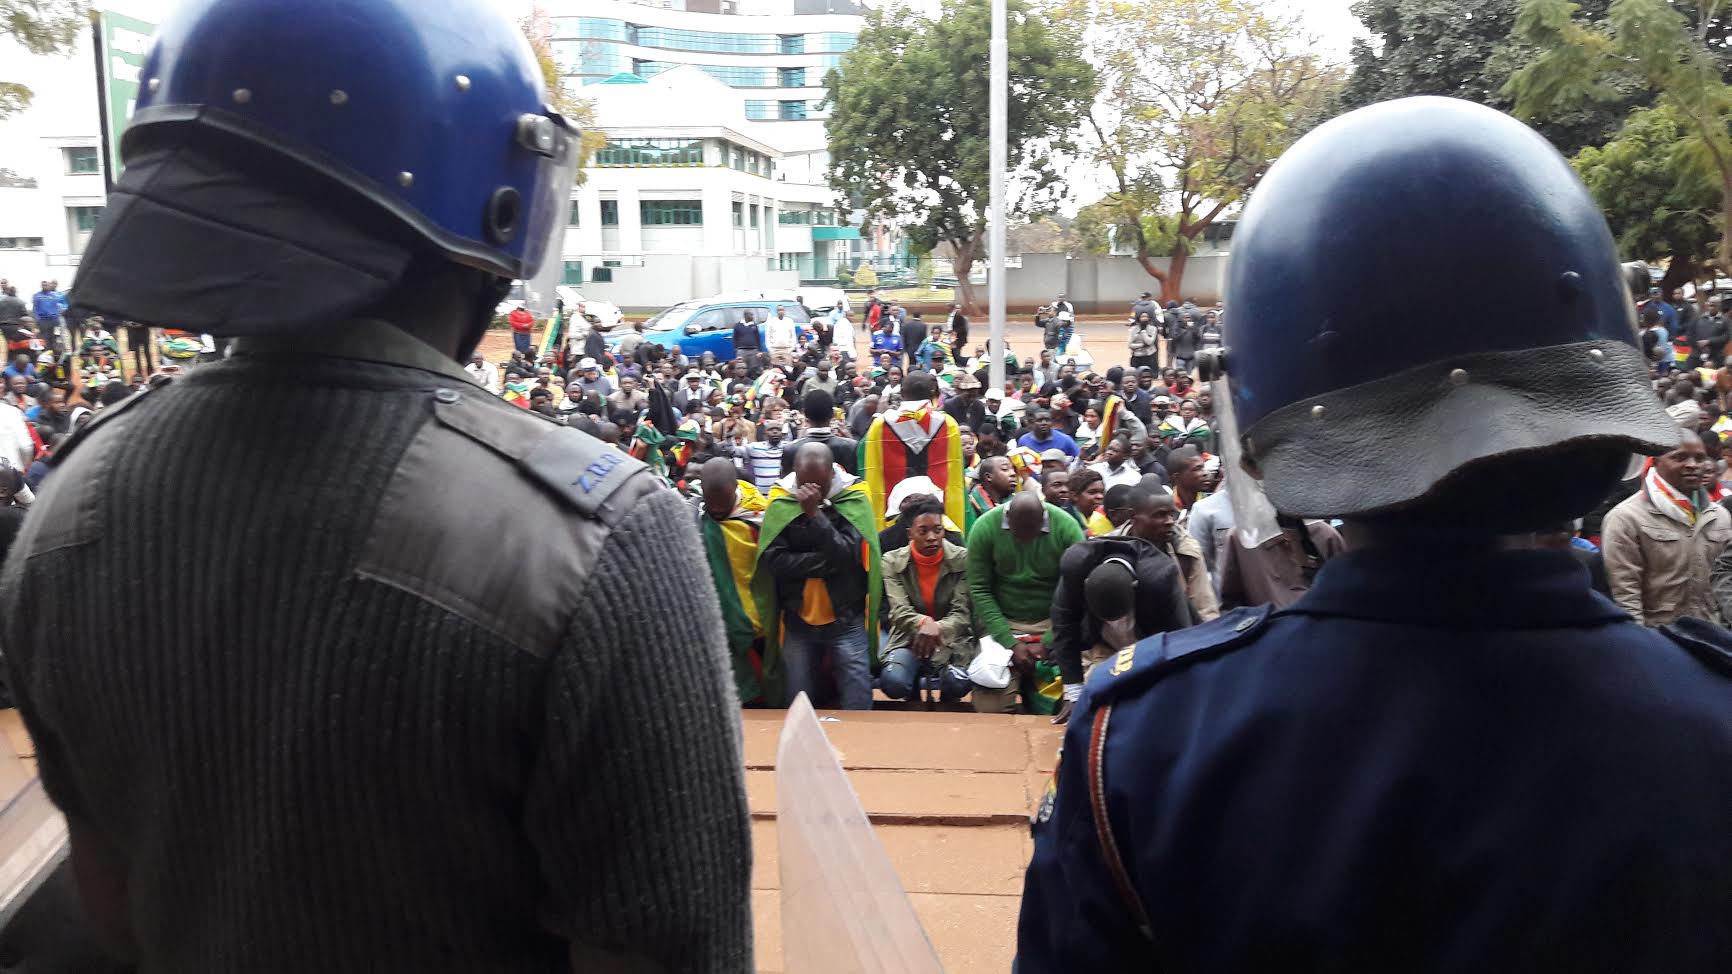 Zimbabwean police watch as protesters gather outside the court. Credit: Simon Allison.